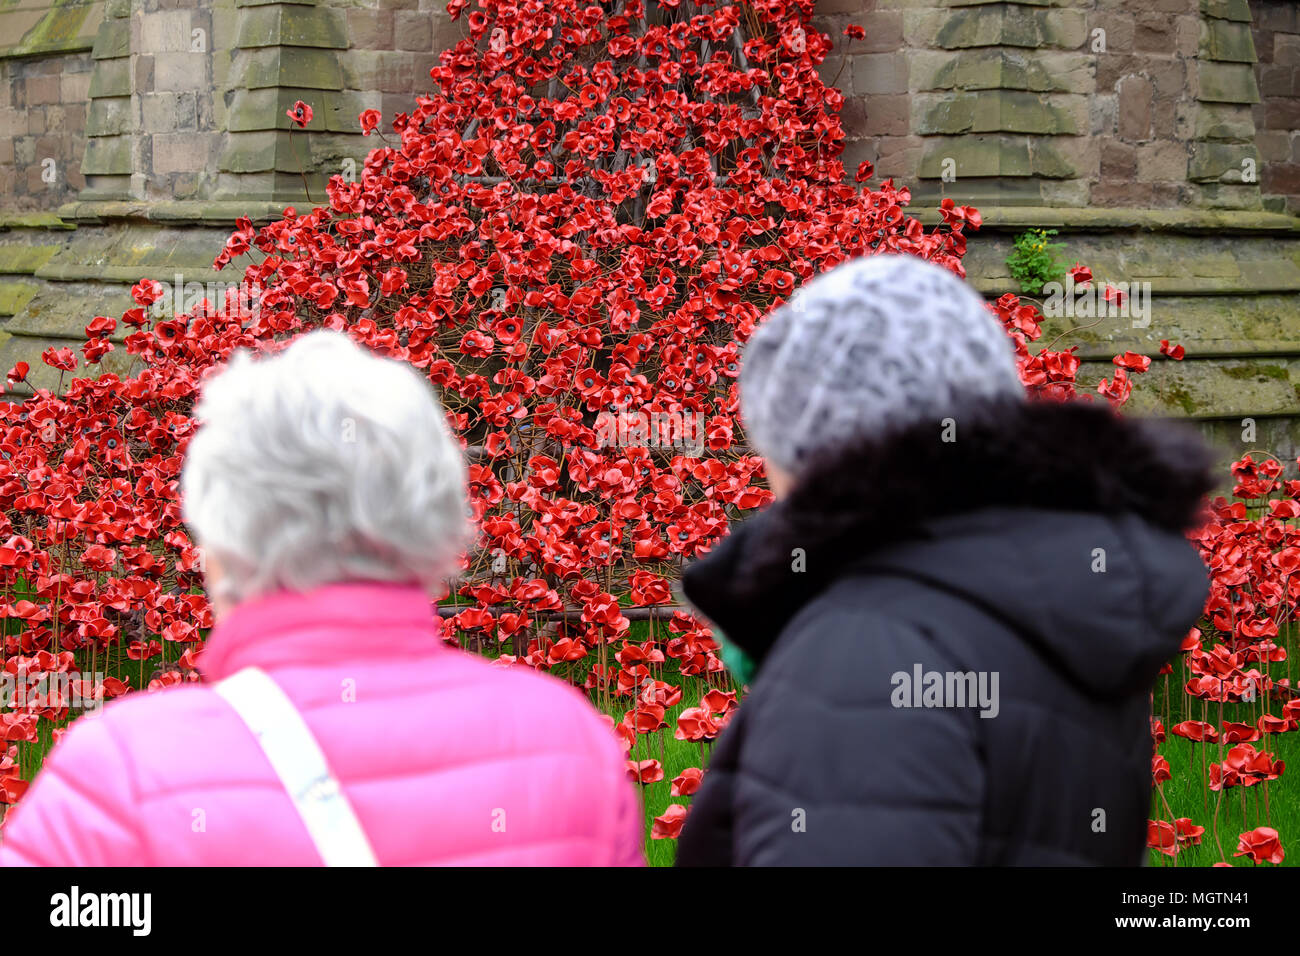 Hereford, UK 29th April 2018.Today is the final day of the Weeping Window ceramaic poppies art installation at Hereford Cathedral - the project commemorates the First World War and is by artist Paul Cummins. It is estimated that over 90,000 visitors have been to see the ceramic poppies in Hereford since they arrived in March 2018. The Weepeing Window installation will now move onto display at Carlisle Castle  - Photo Steven May / Alamy Live News Stock Photo